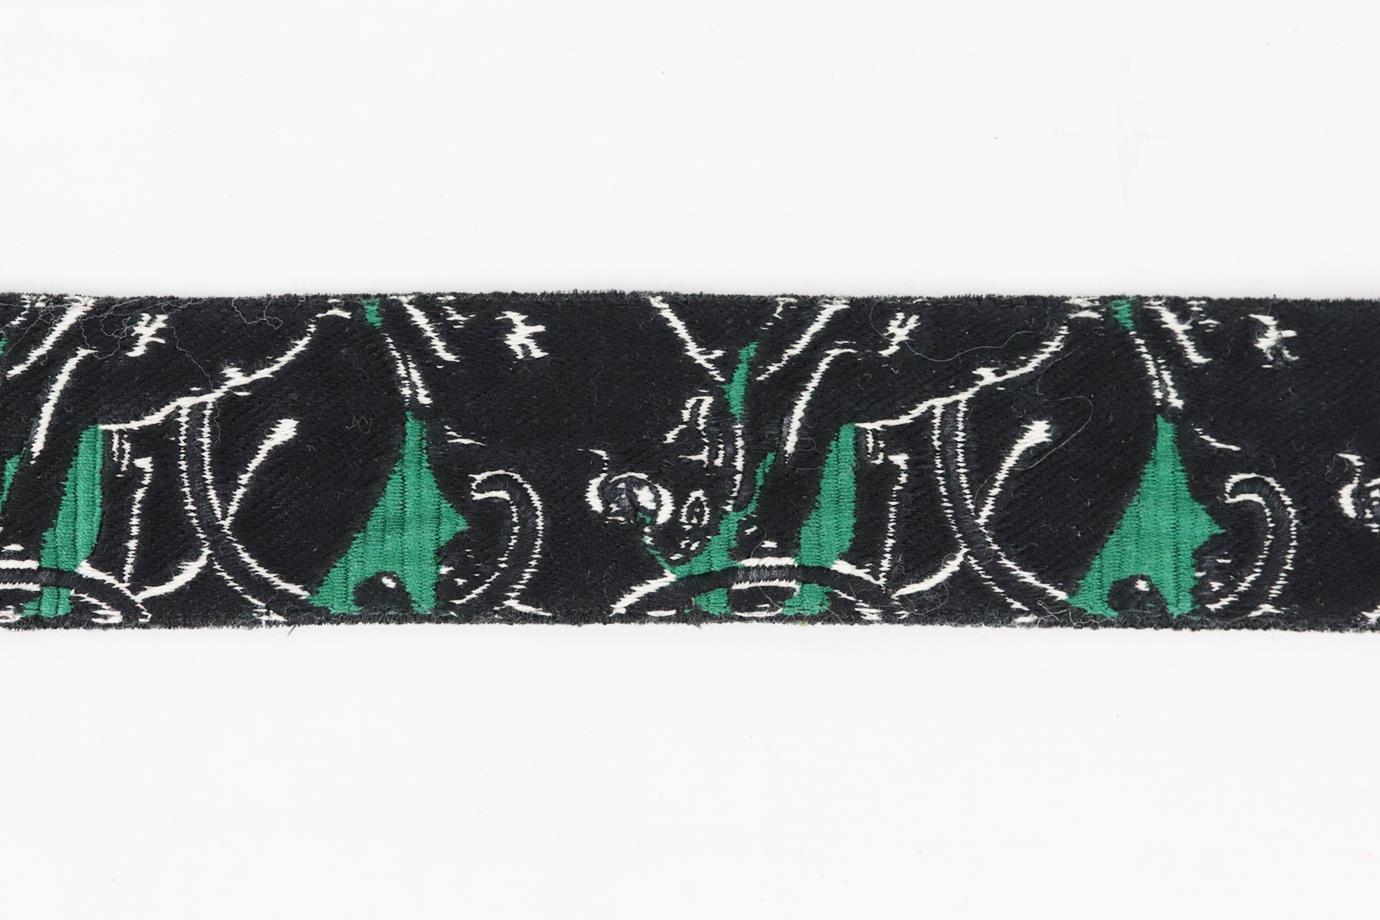 Valentino embroidered canvas and leather bag strap. Made from black and green panther embroidered canvas and black leather and silver-tone clasps. L: 41 in. W: 2 in